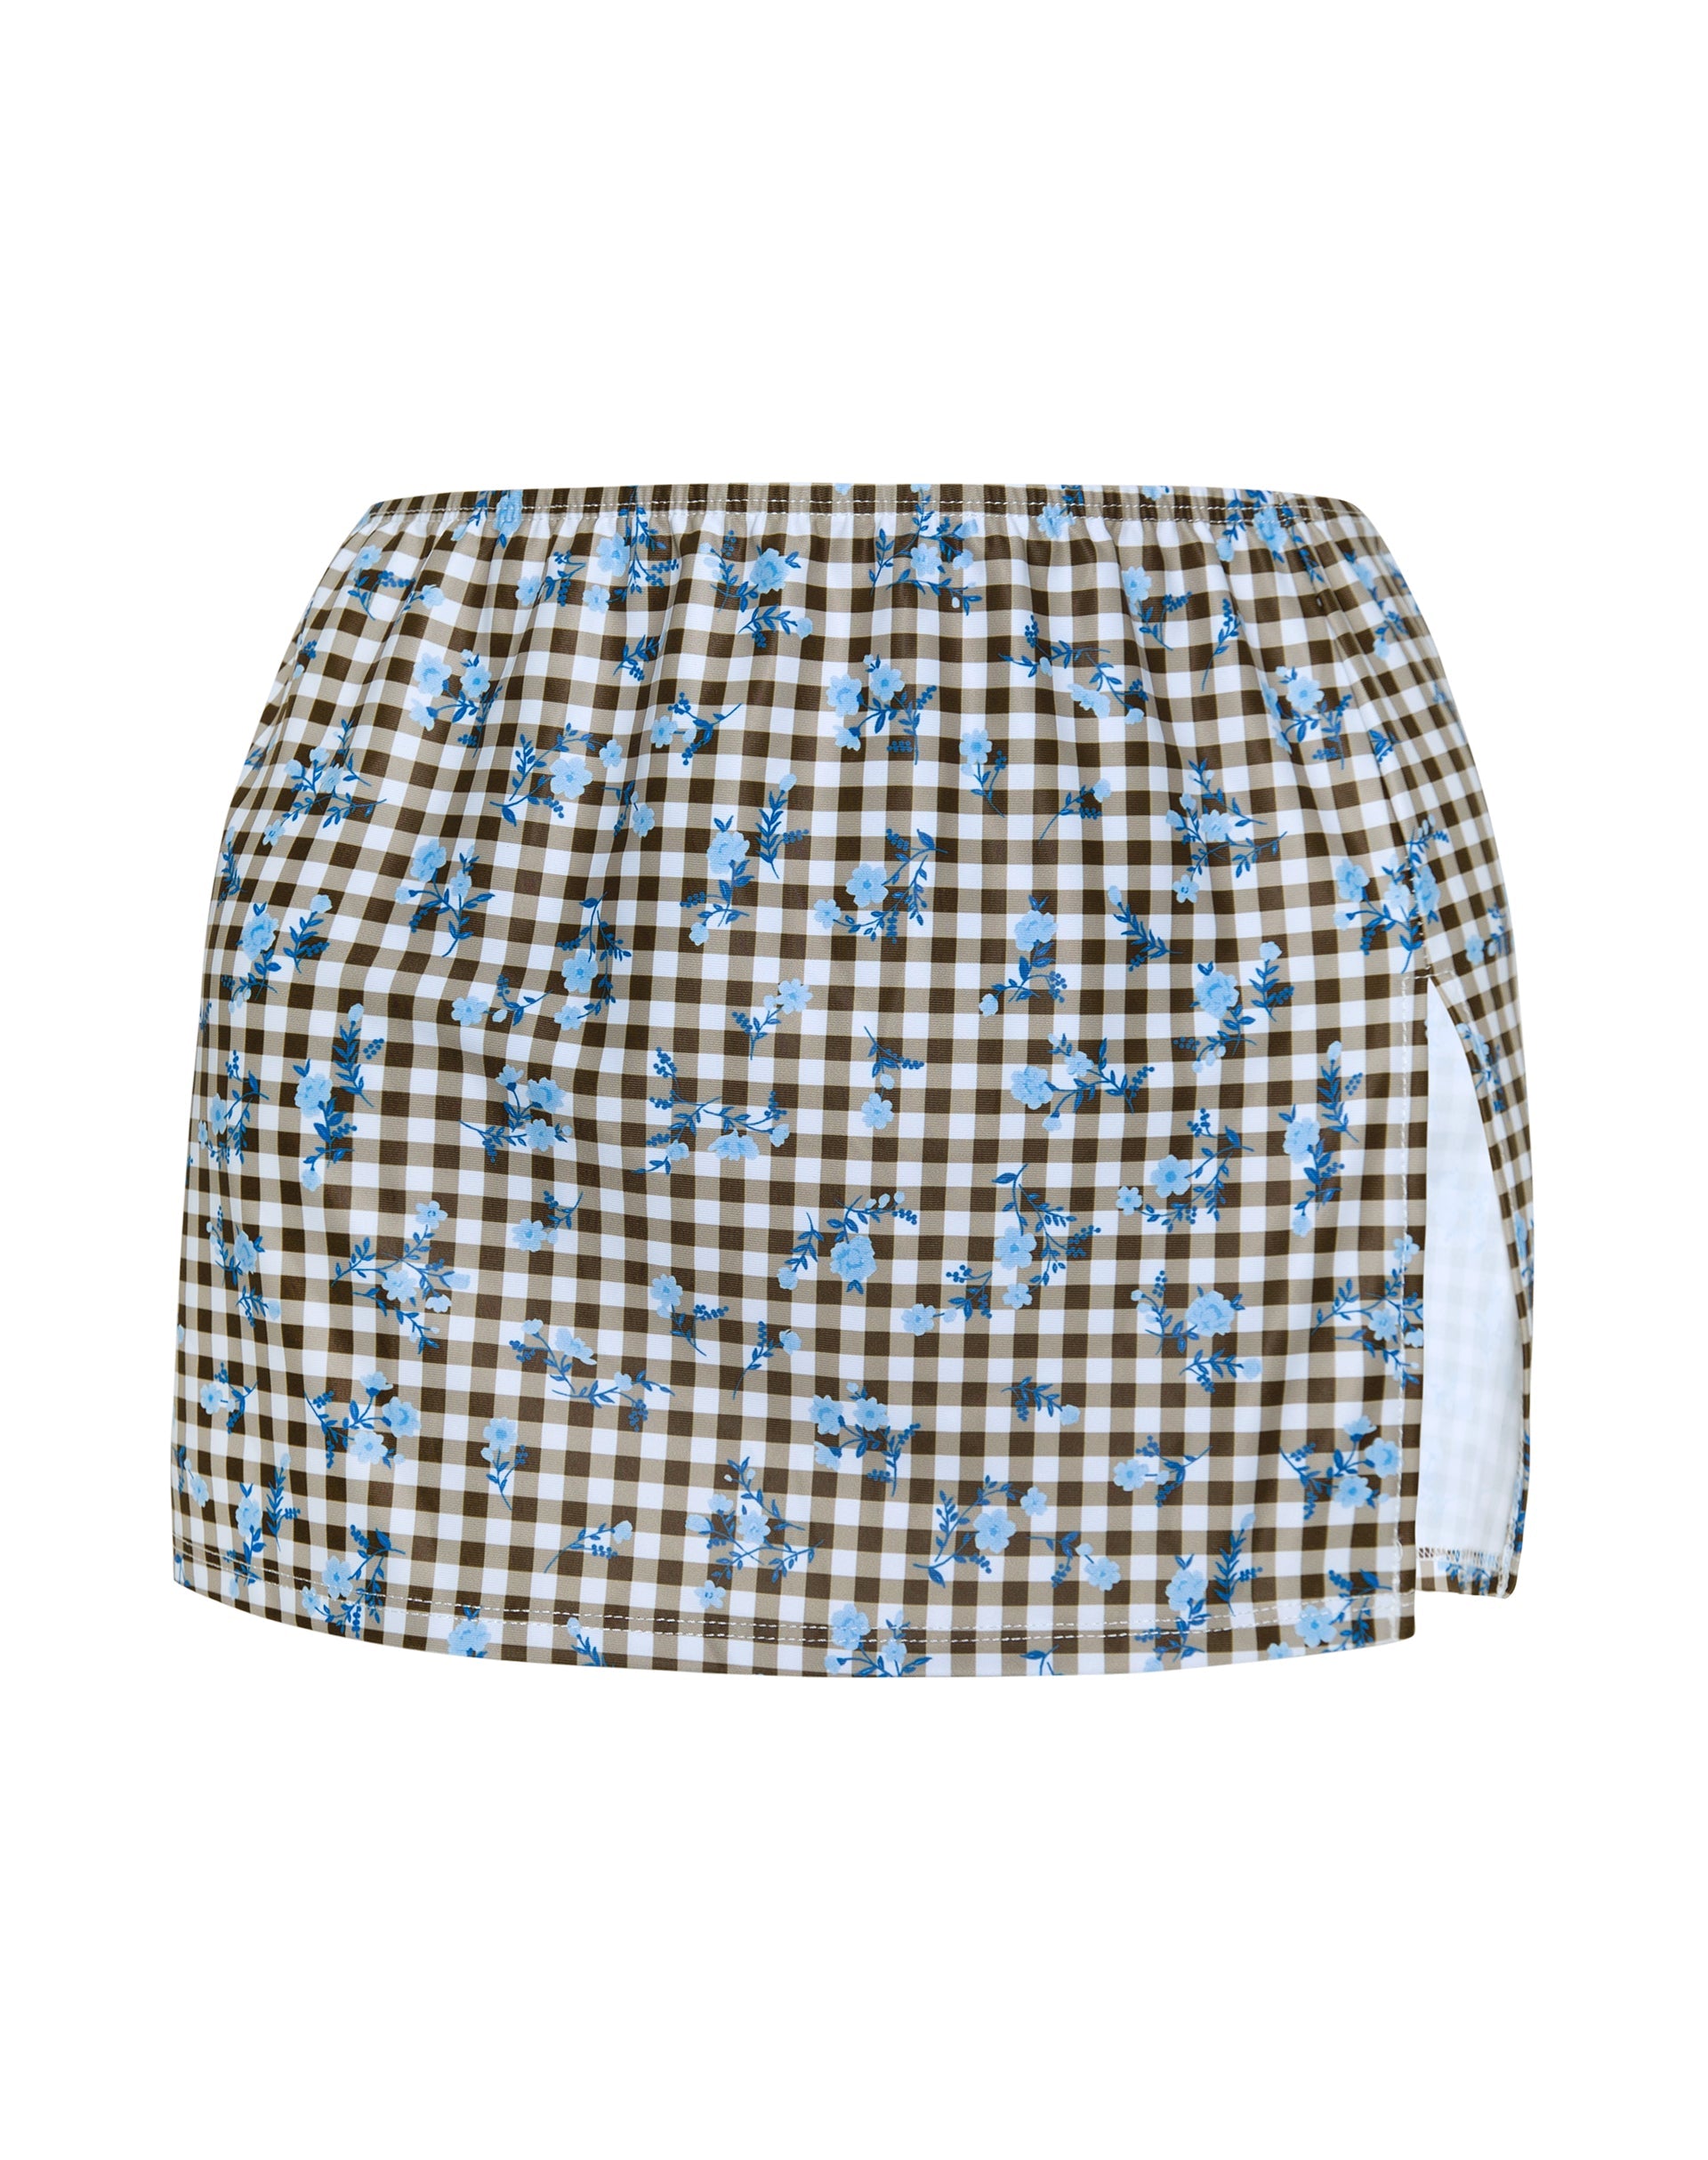 Image of Goby Mini Skirt in Floral Gingham Brown